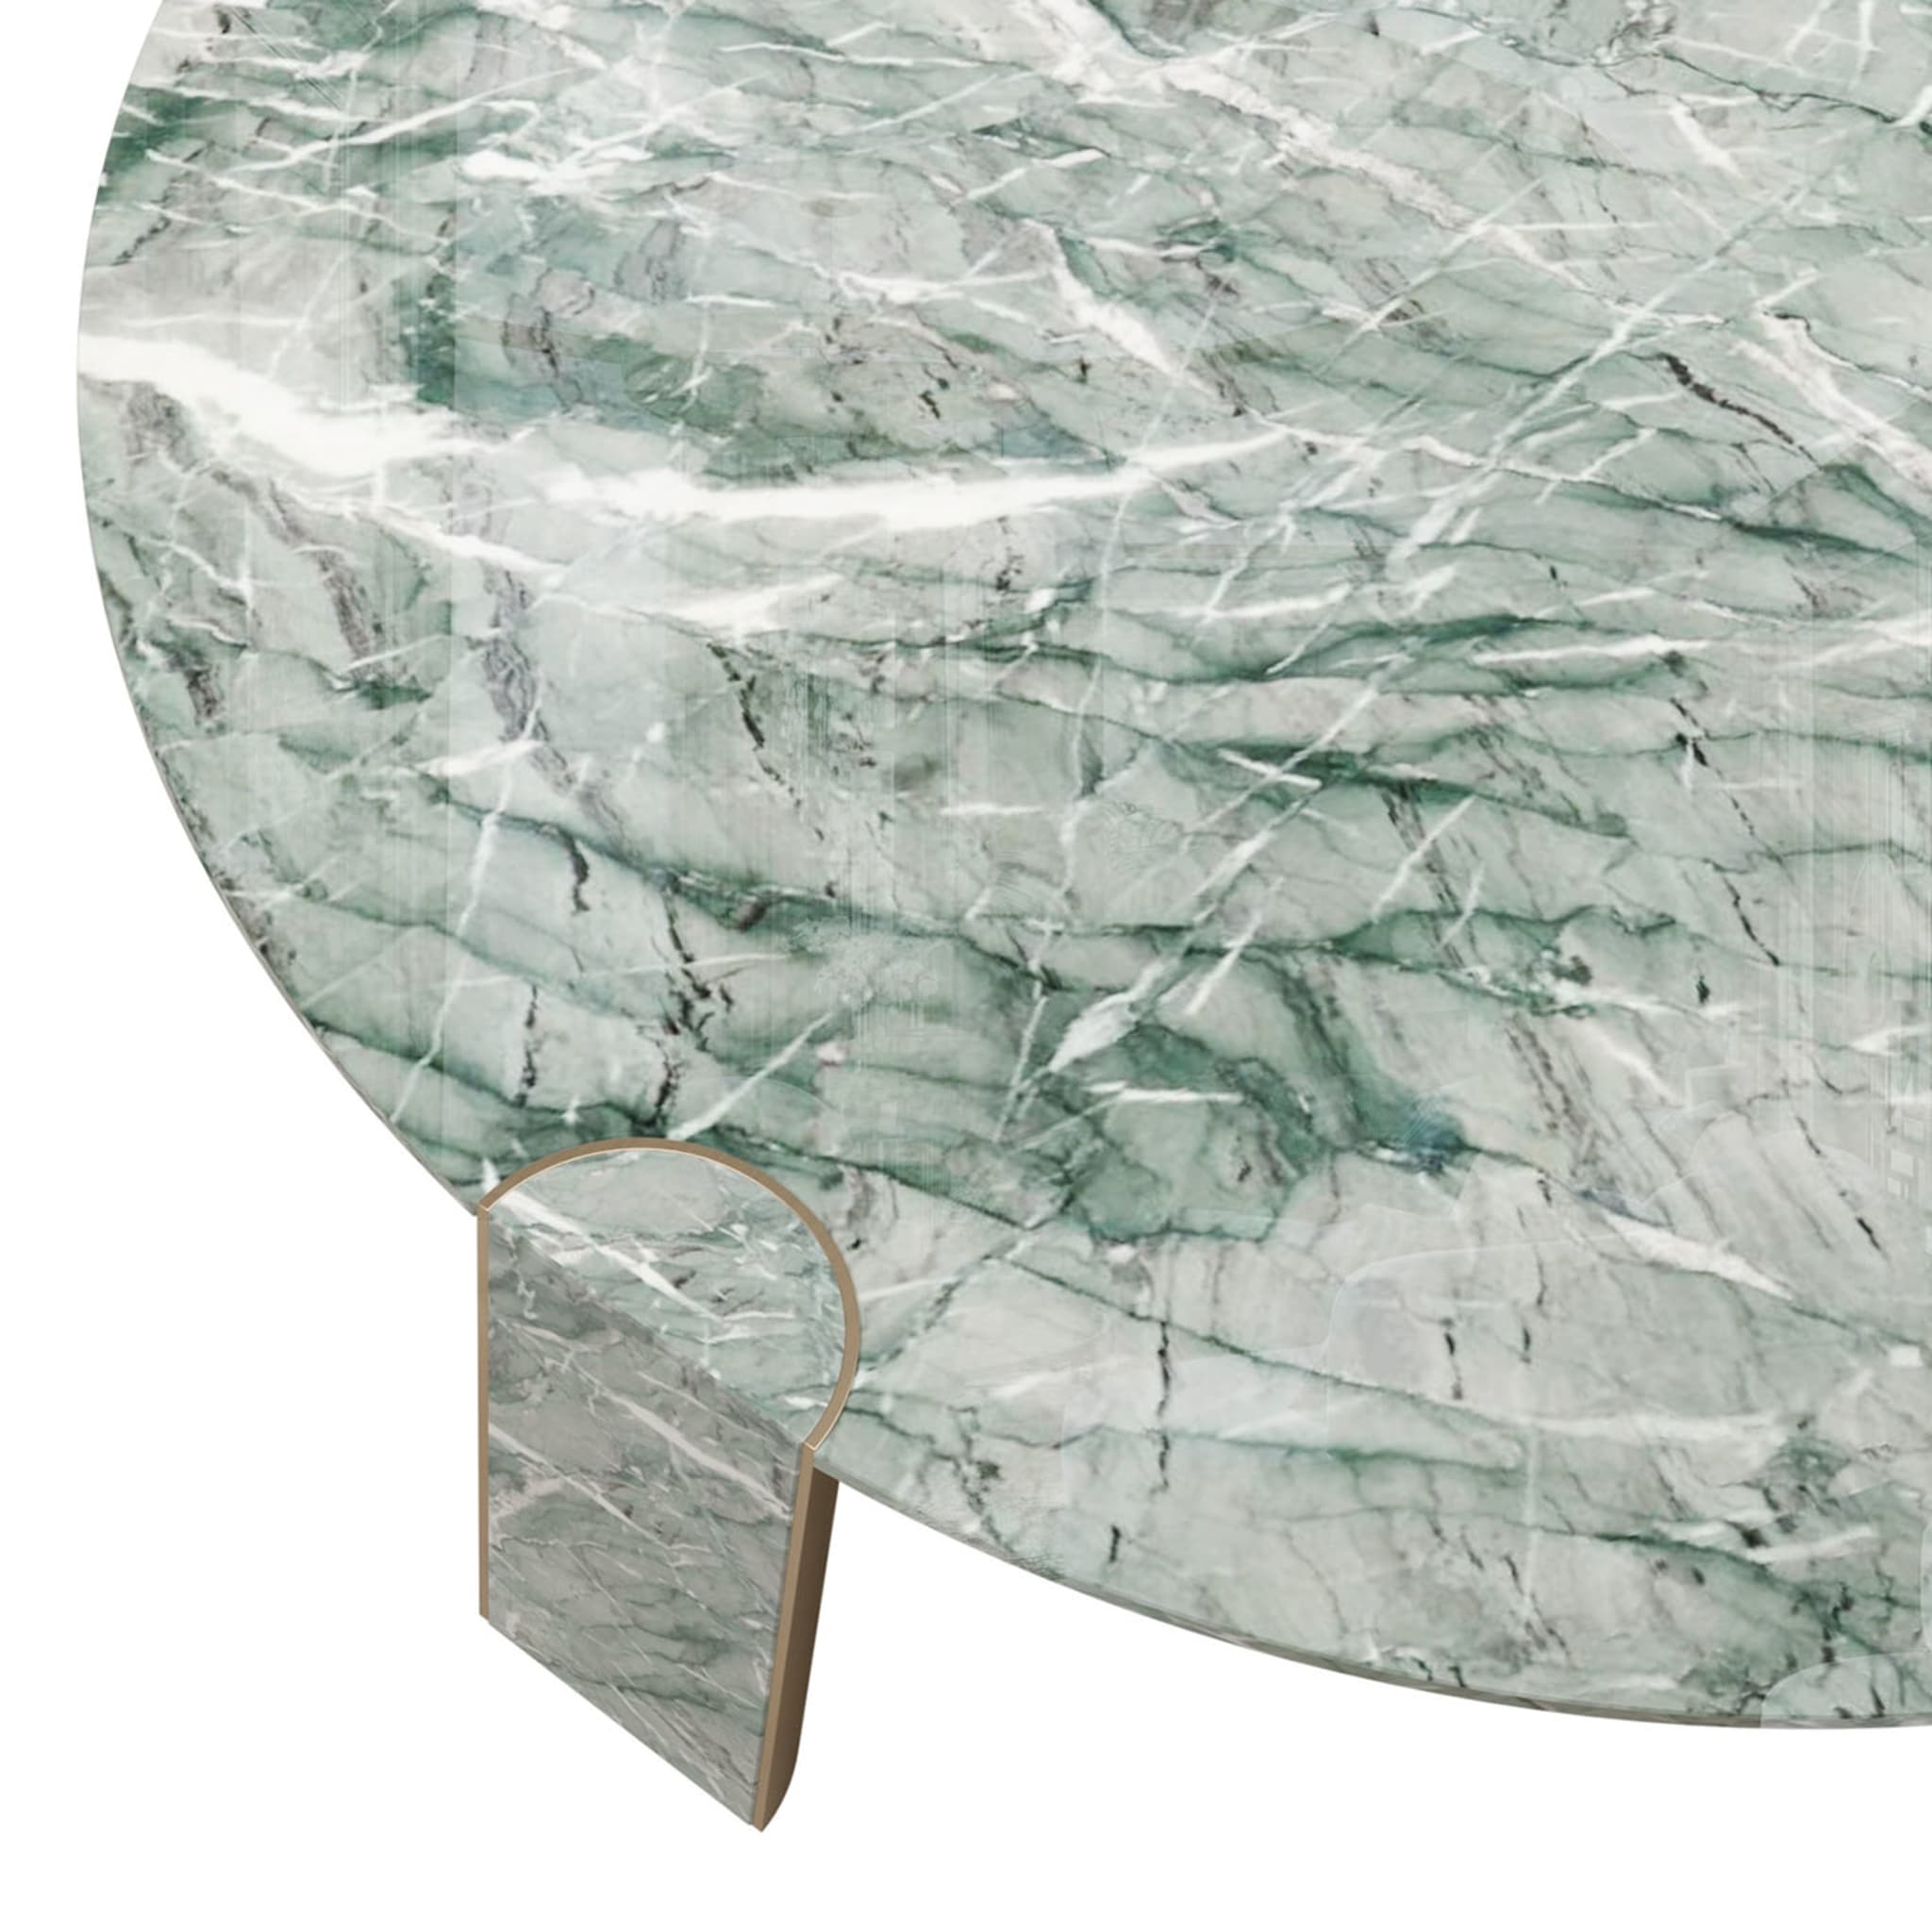 Paul Low Antigua-Green Marble Coffee Table - Alternative view 1